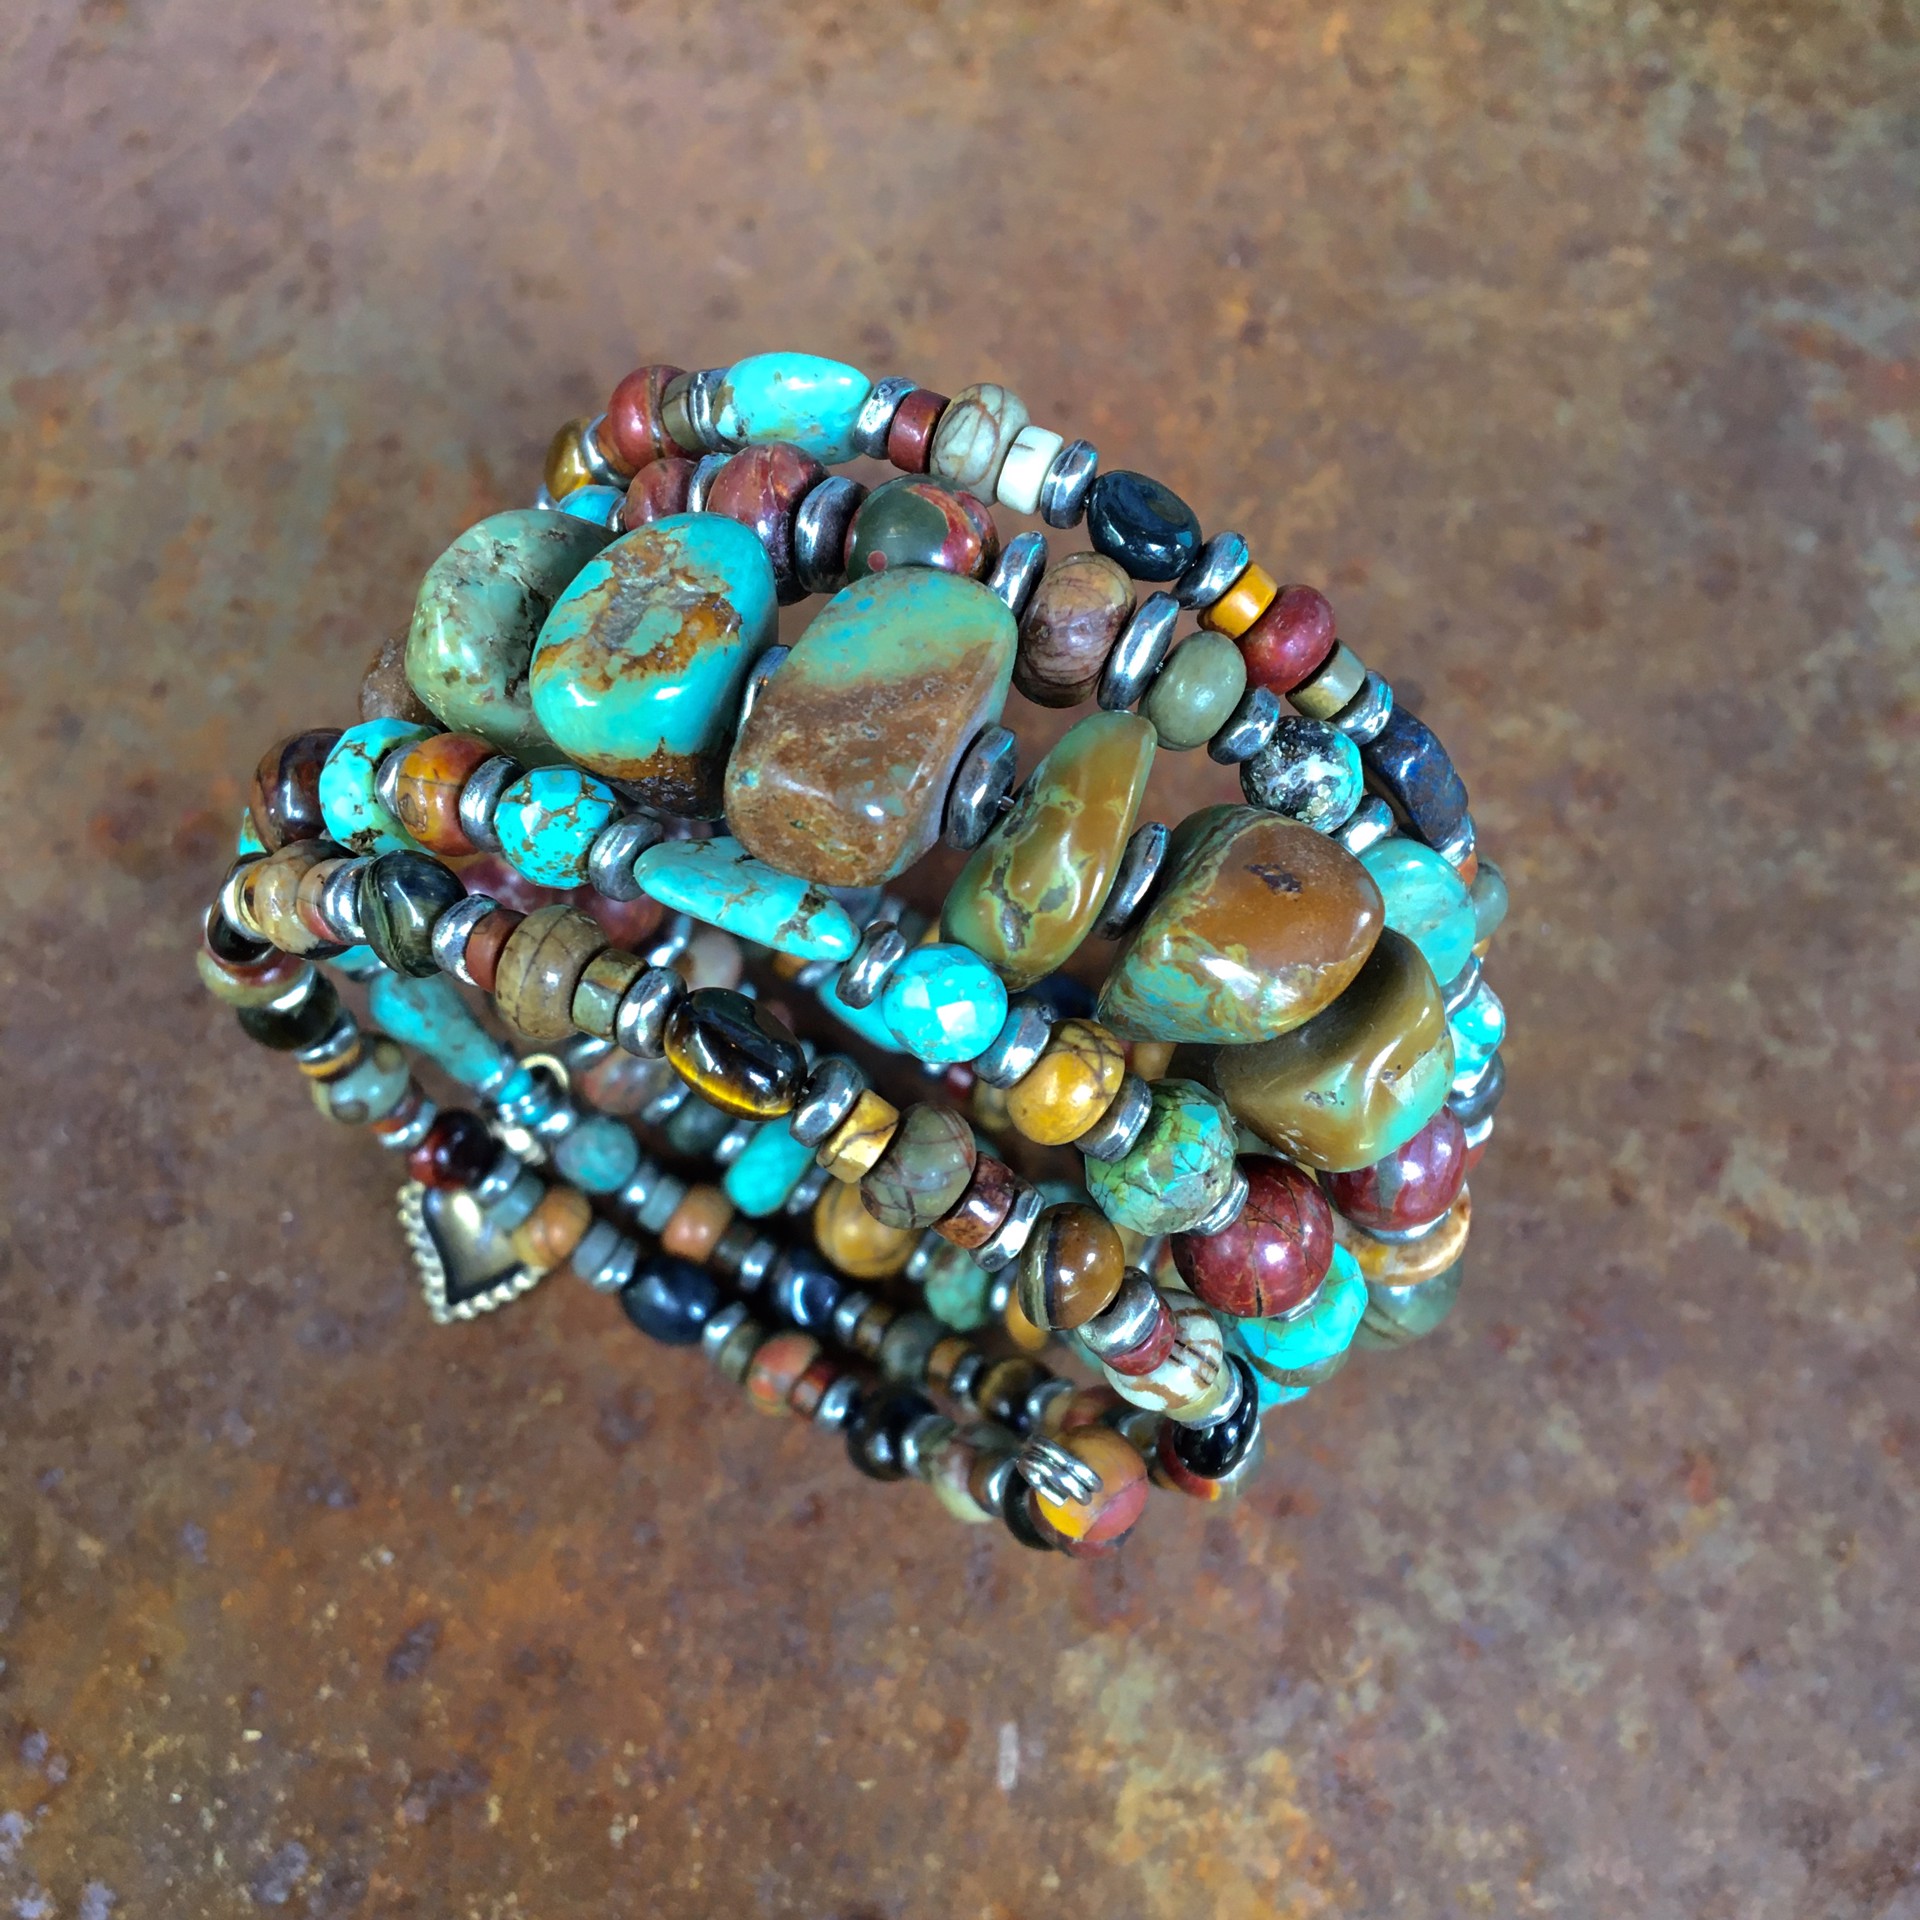 K345 Earth Tones Turquoise and Jasper Bracelet by Kelly Ormsby